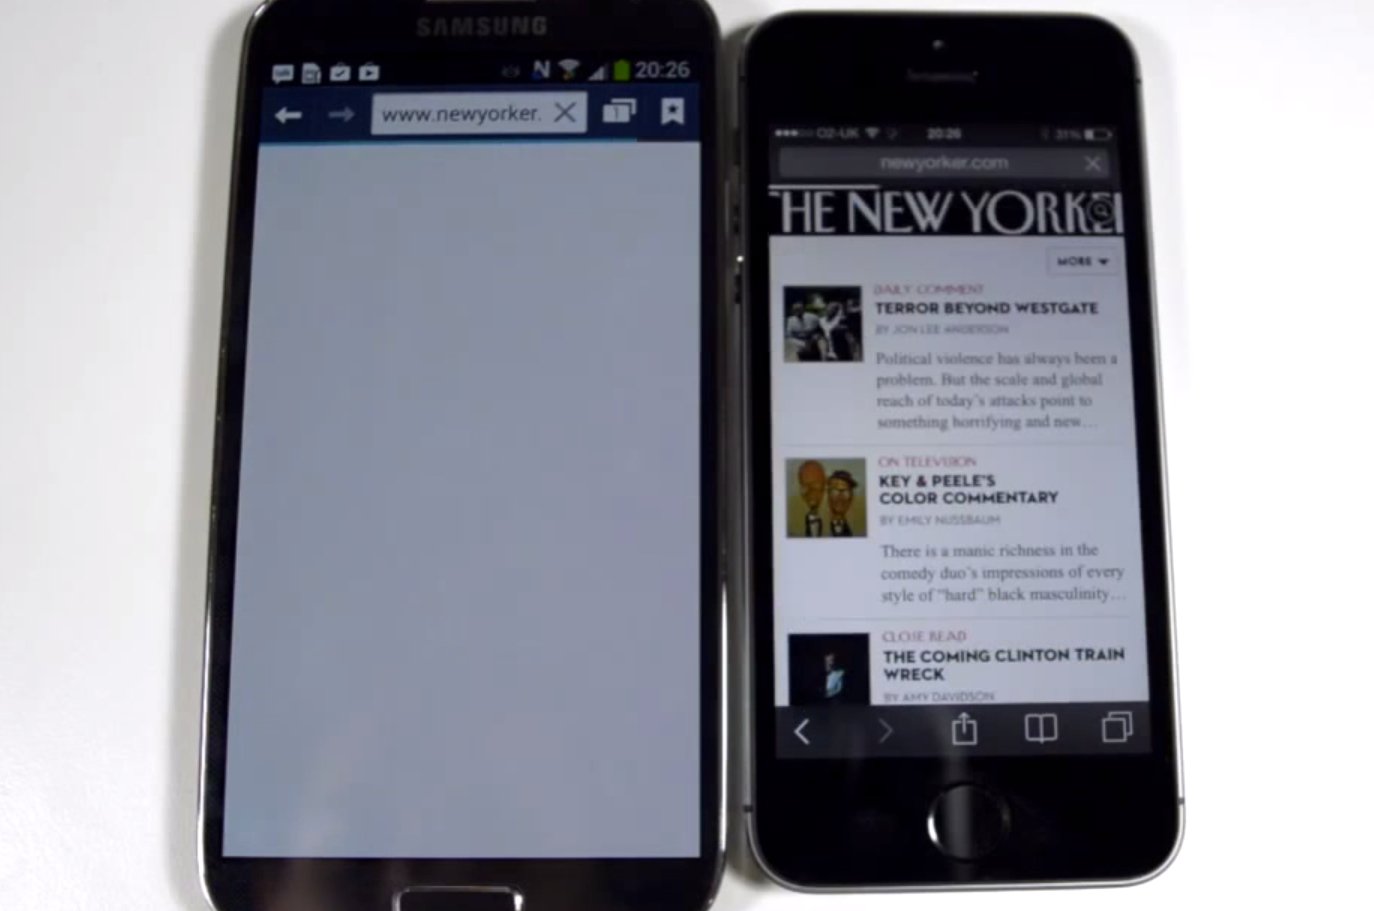 Browser Speed-Test iPhone 5s vs. Samsung Galaxy S4 3